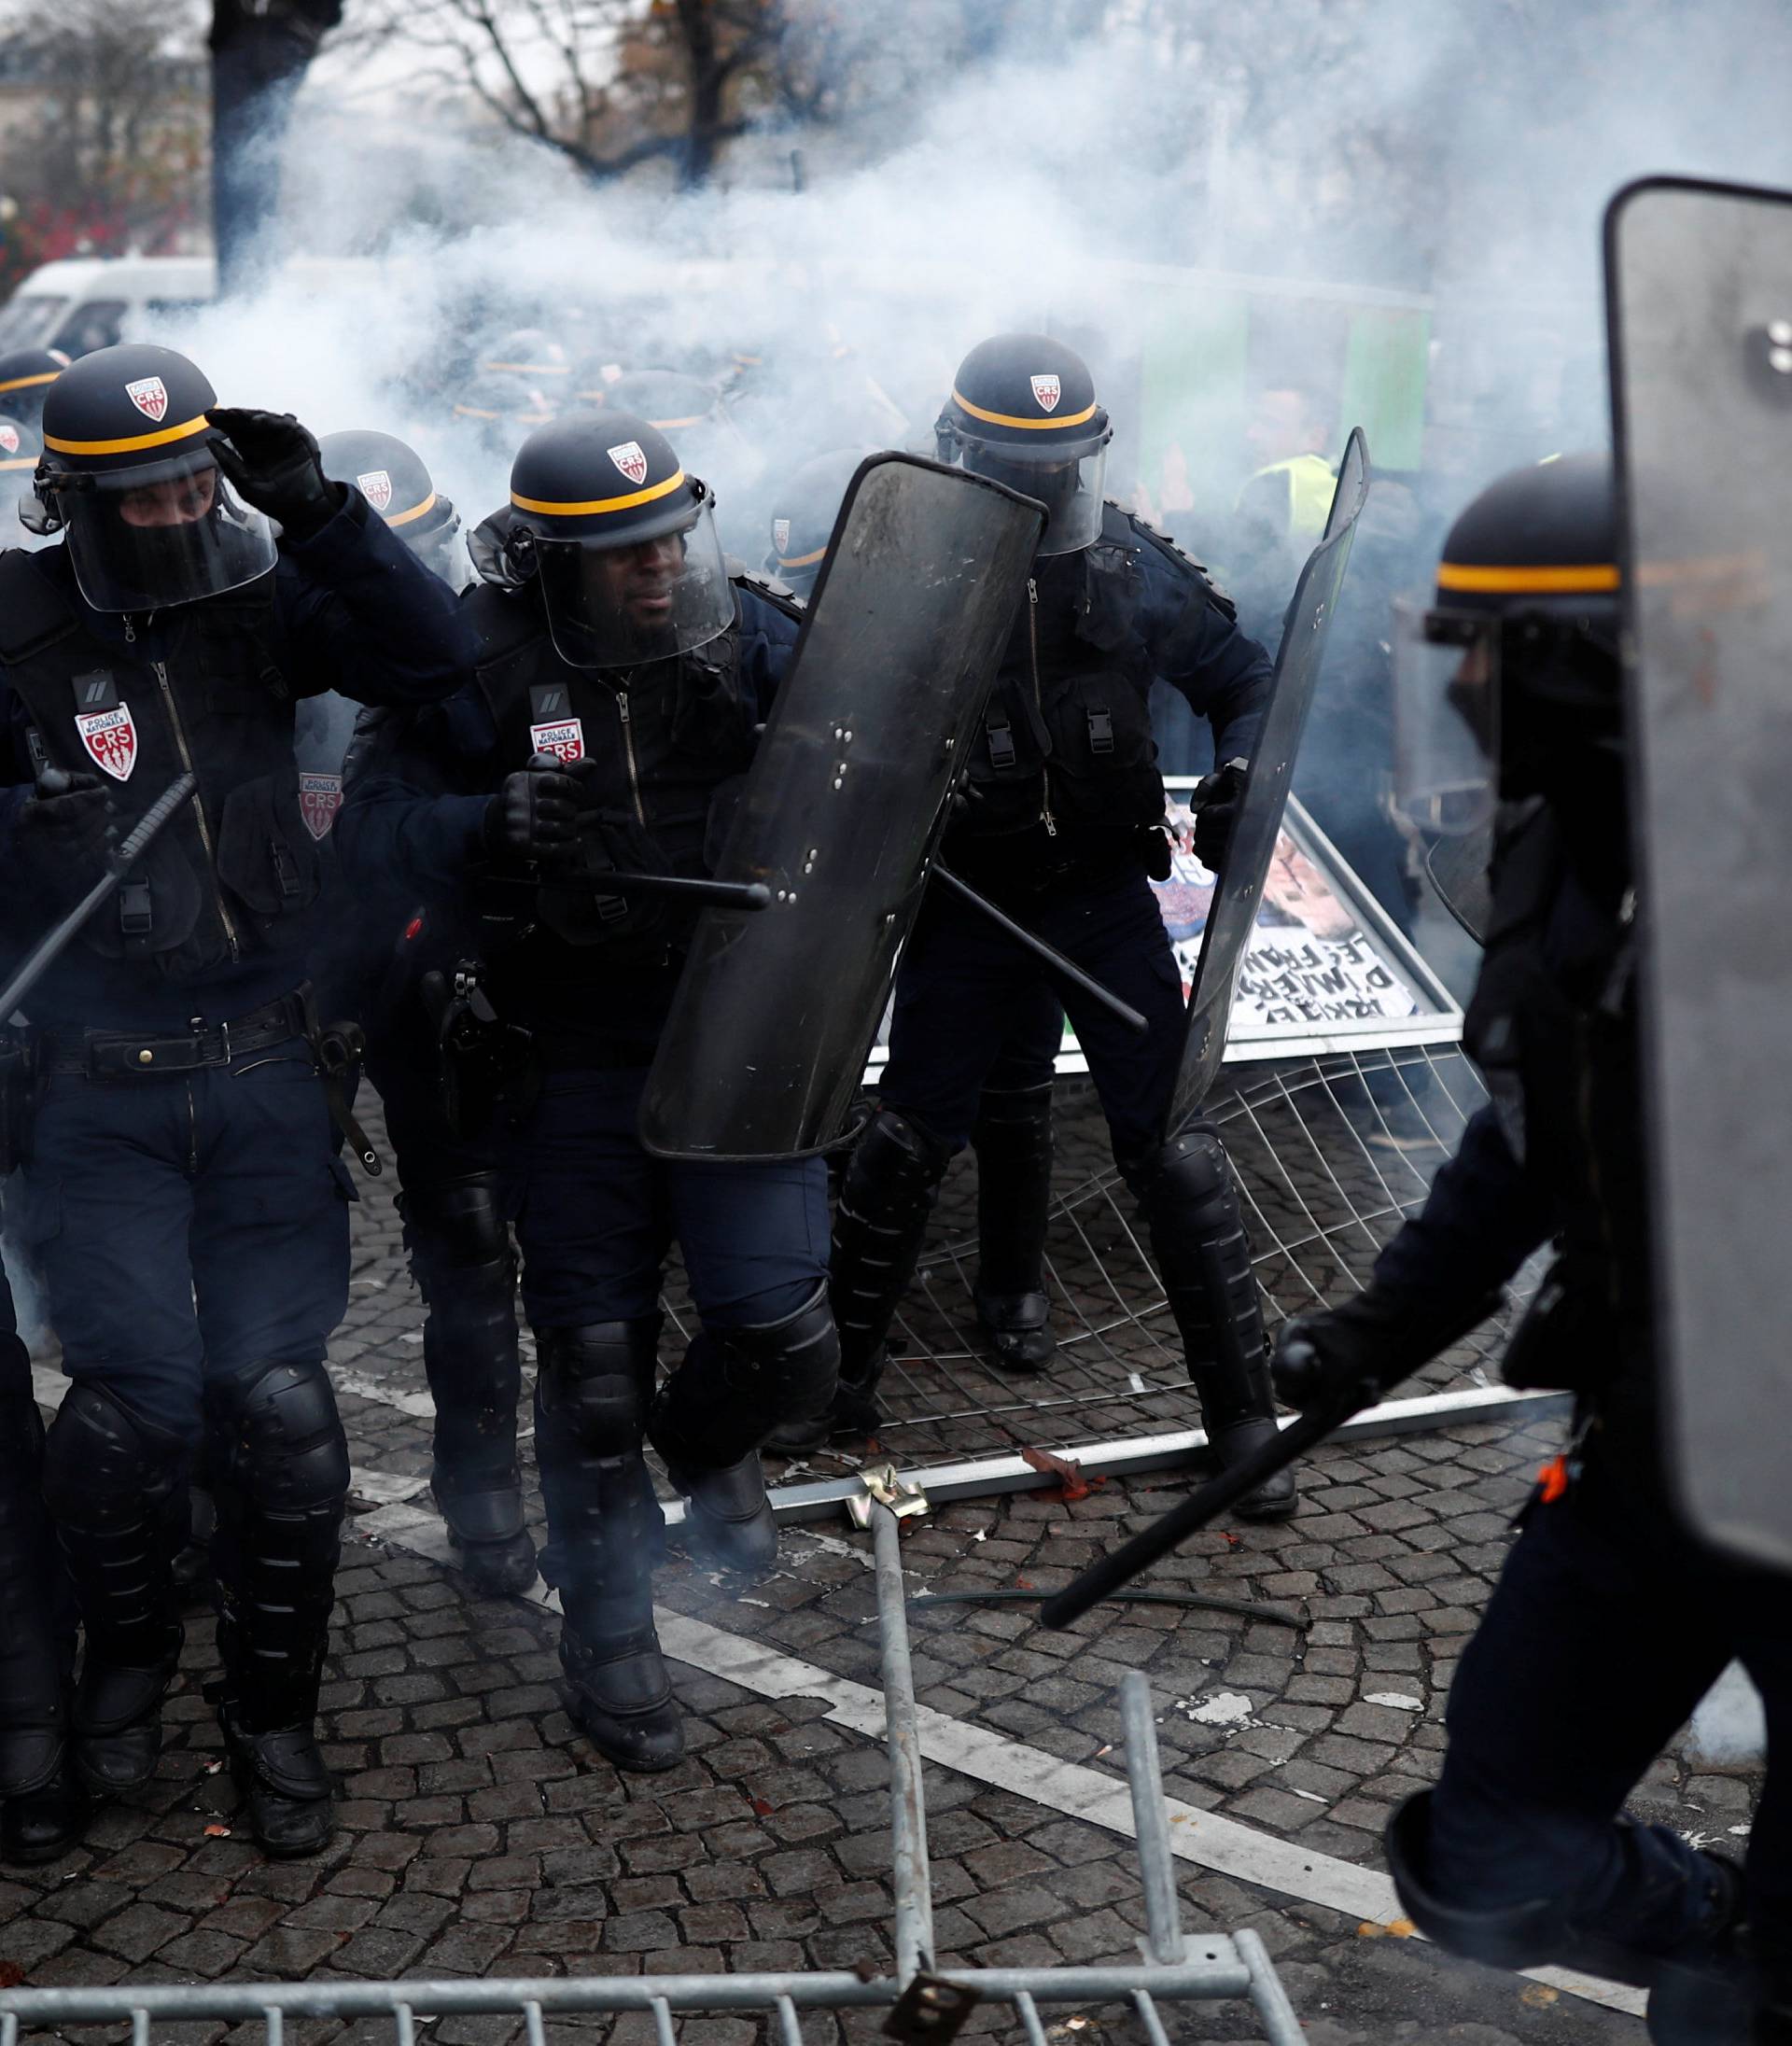 Police officers fire a tear gas during protests against higher fuel prices, on the Champs-Elysee in Paris